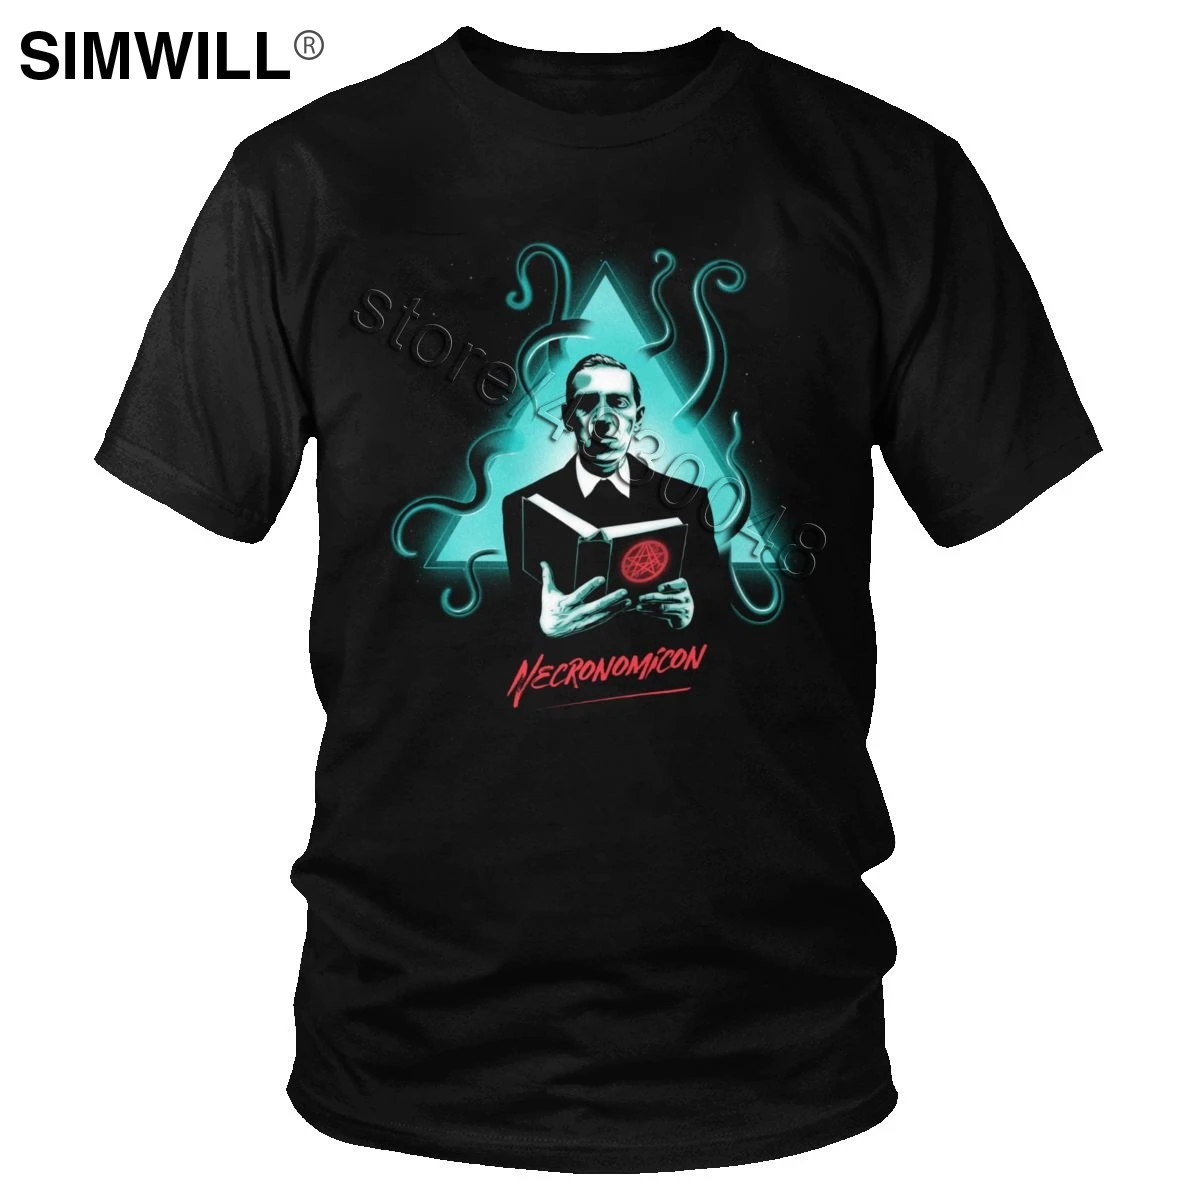 

Fashion Call Of Cthulhu Men Necronomicon Lovecraft T-Shirt Short Sleeved Cotton Printing Tee Trend Tops Fans Gift Merchandise